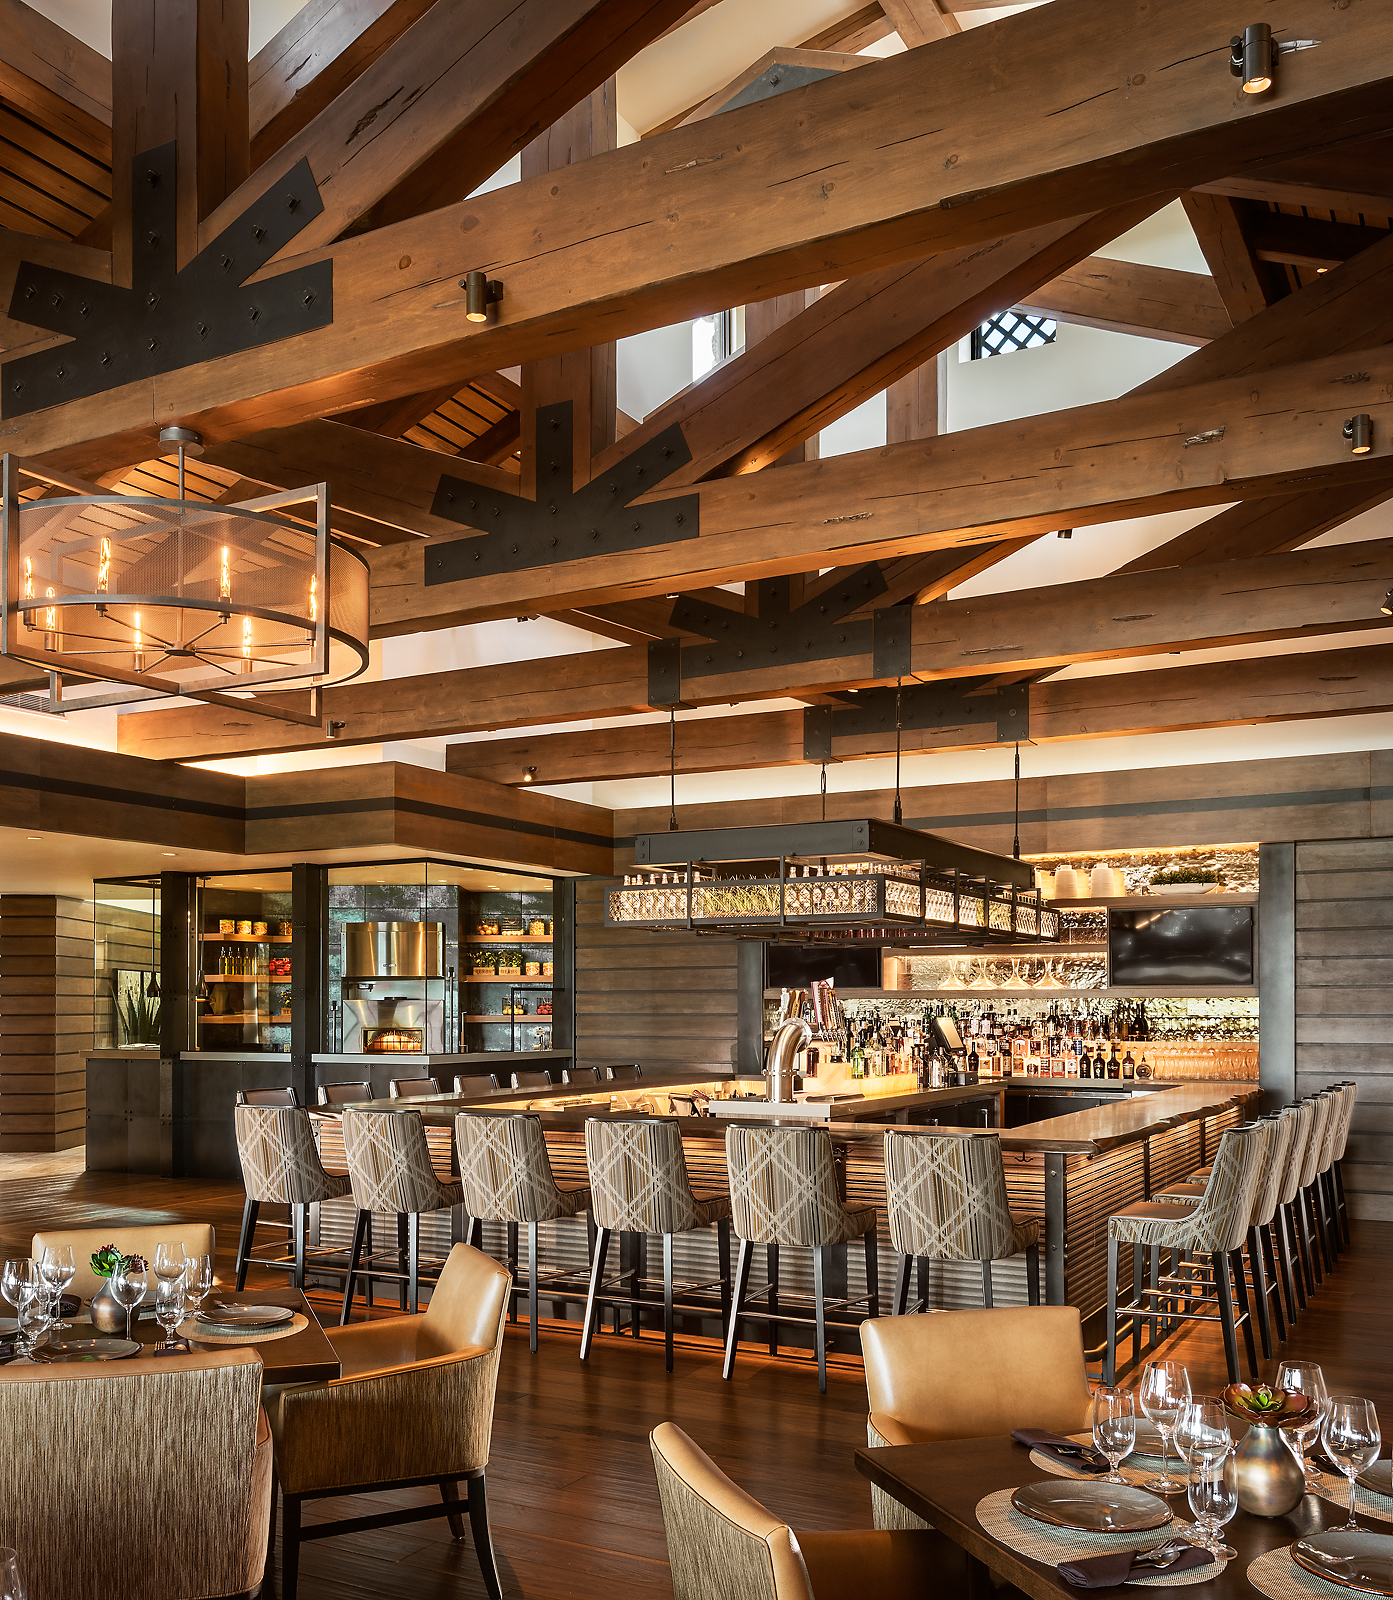 A restaurant with wooden beams and a bar.